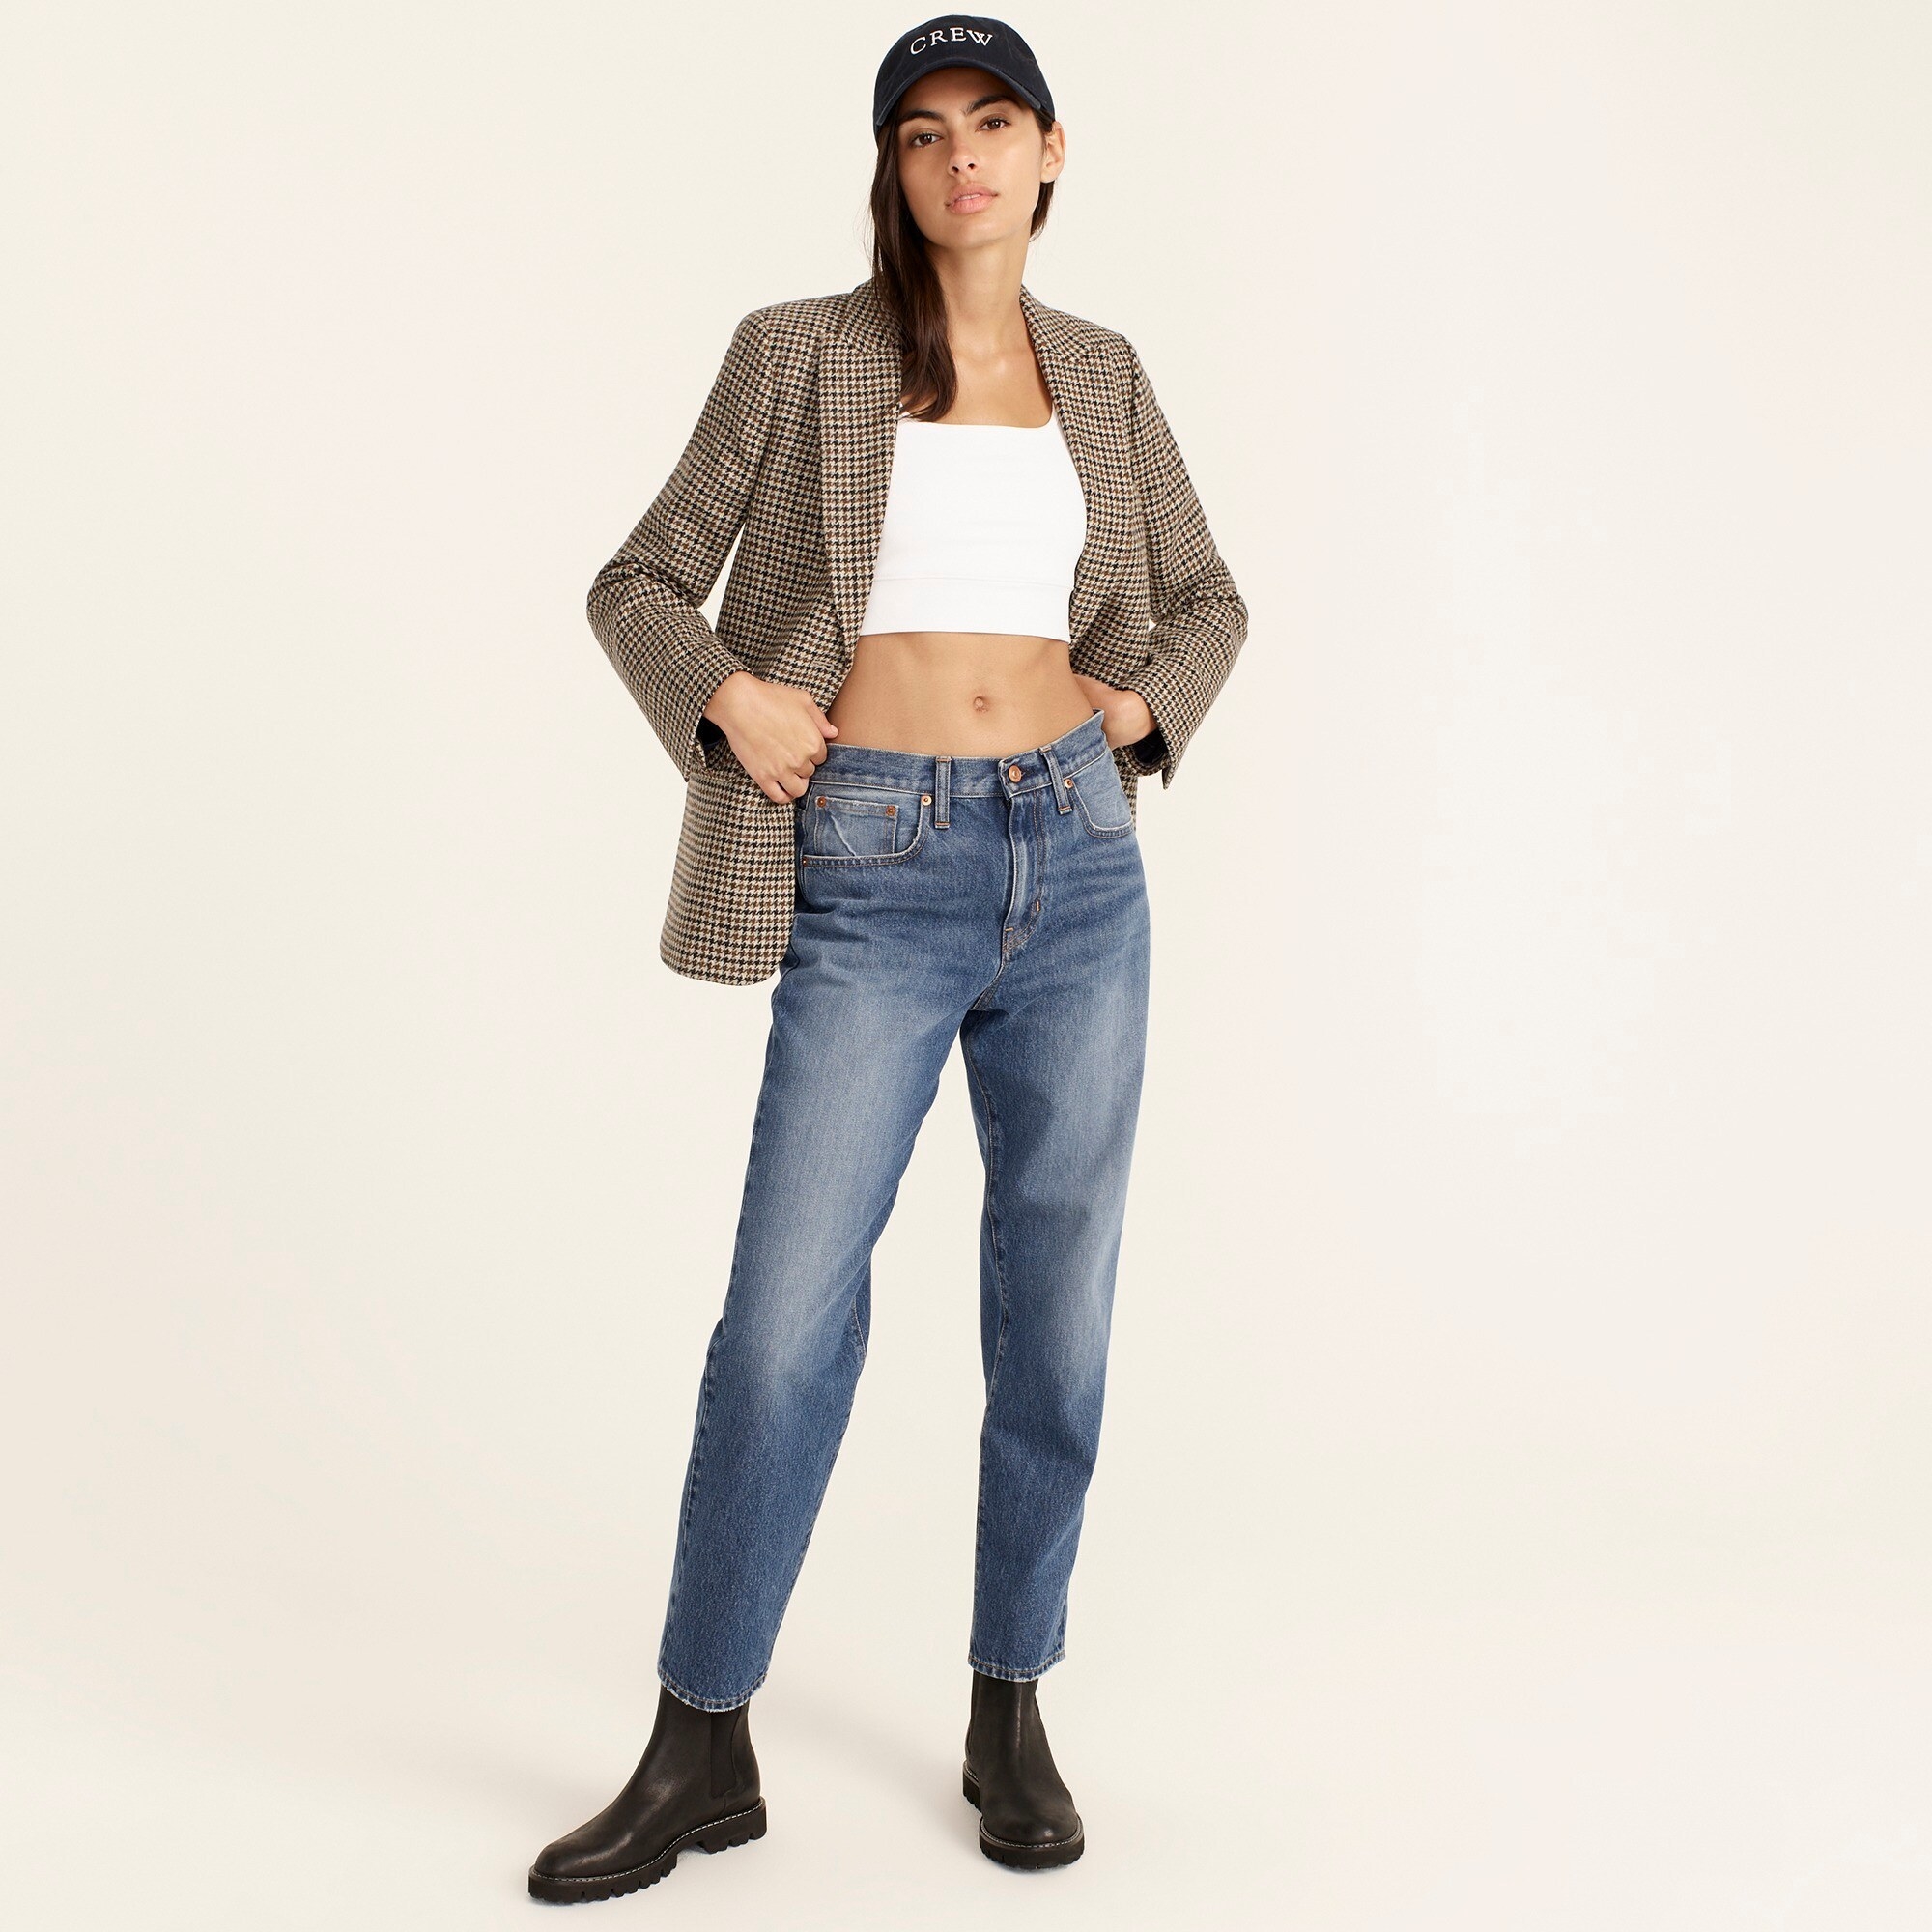 An image of a model wearing a pair of boyfriend jeans in a bright indigo wash